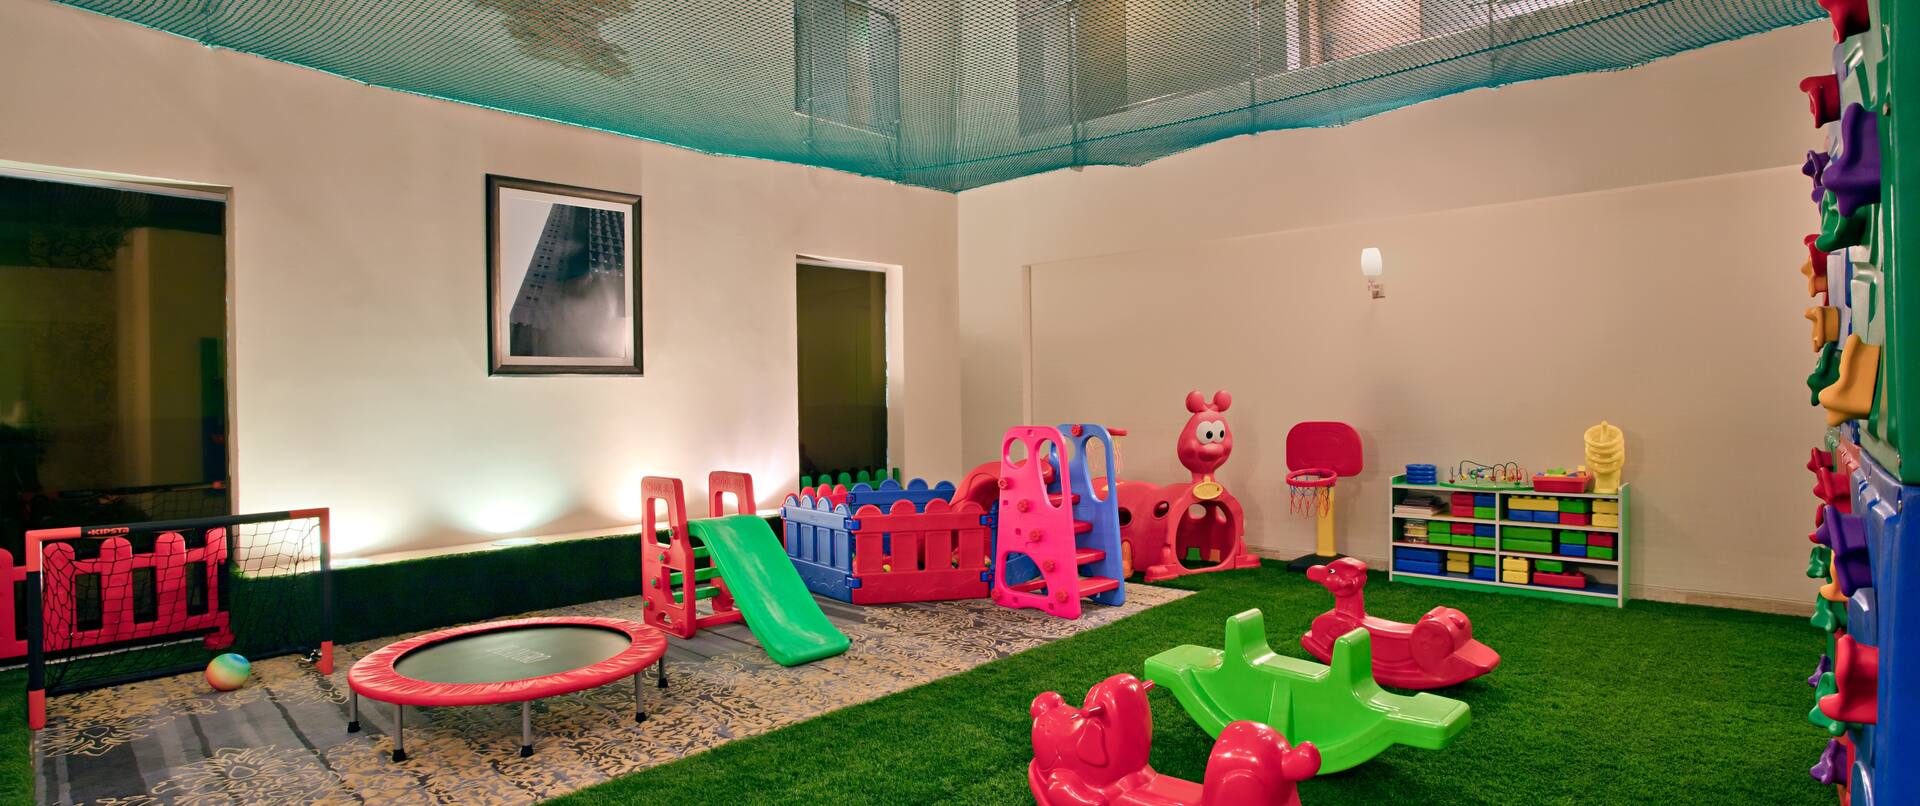 Kids room with colorful kids furniture